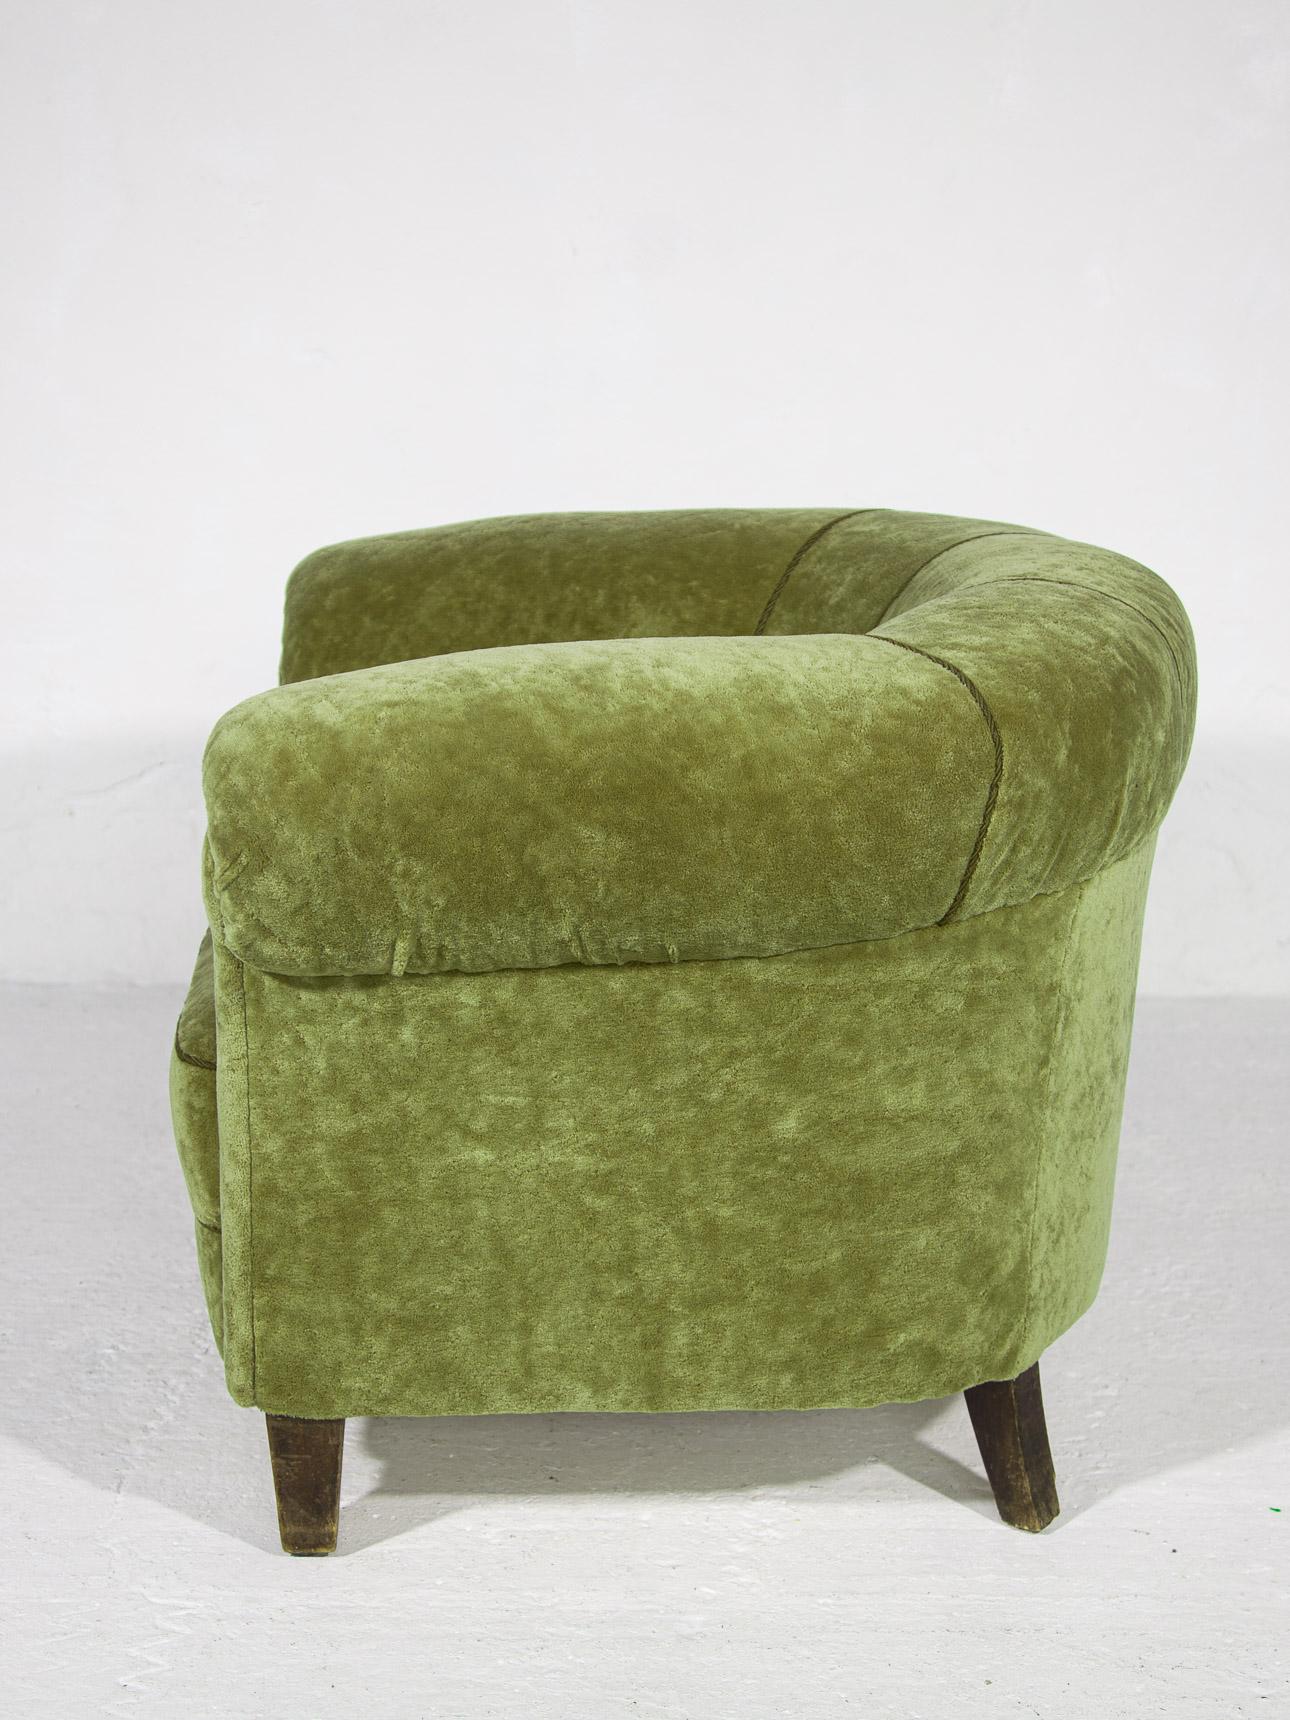 Hand-Crafted Art Deco Lounge Chairs in Green Olive Velvet Upholstery For Sale